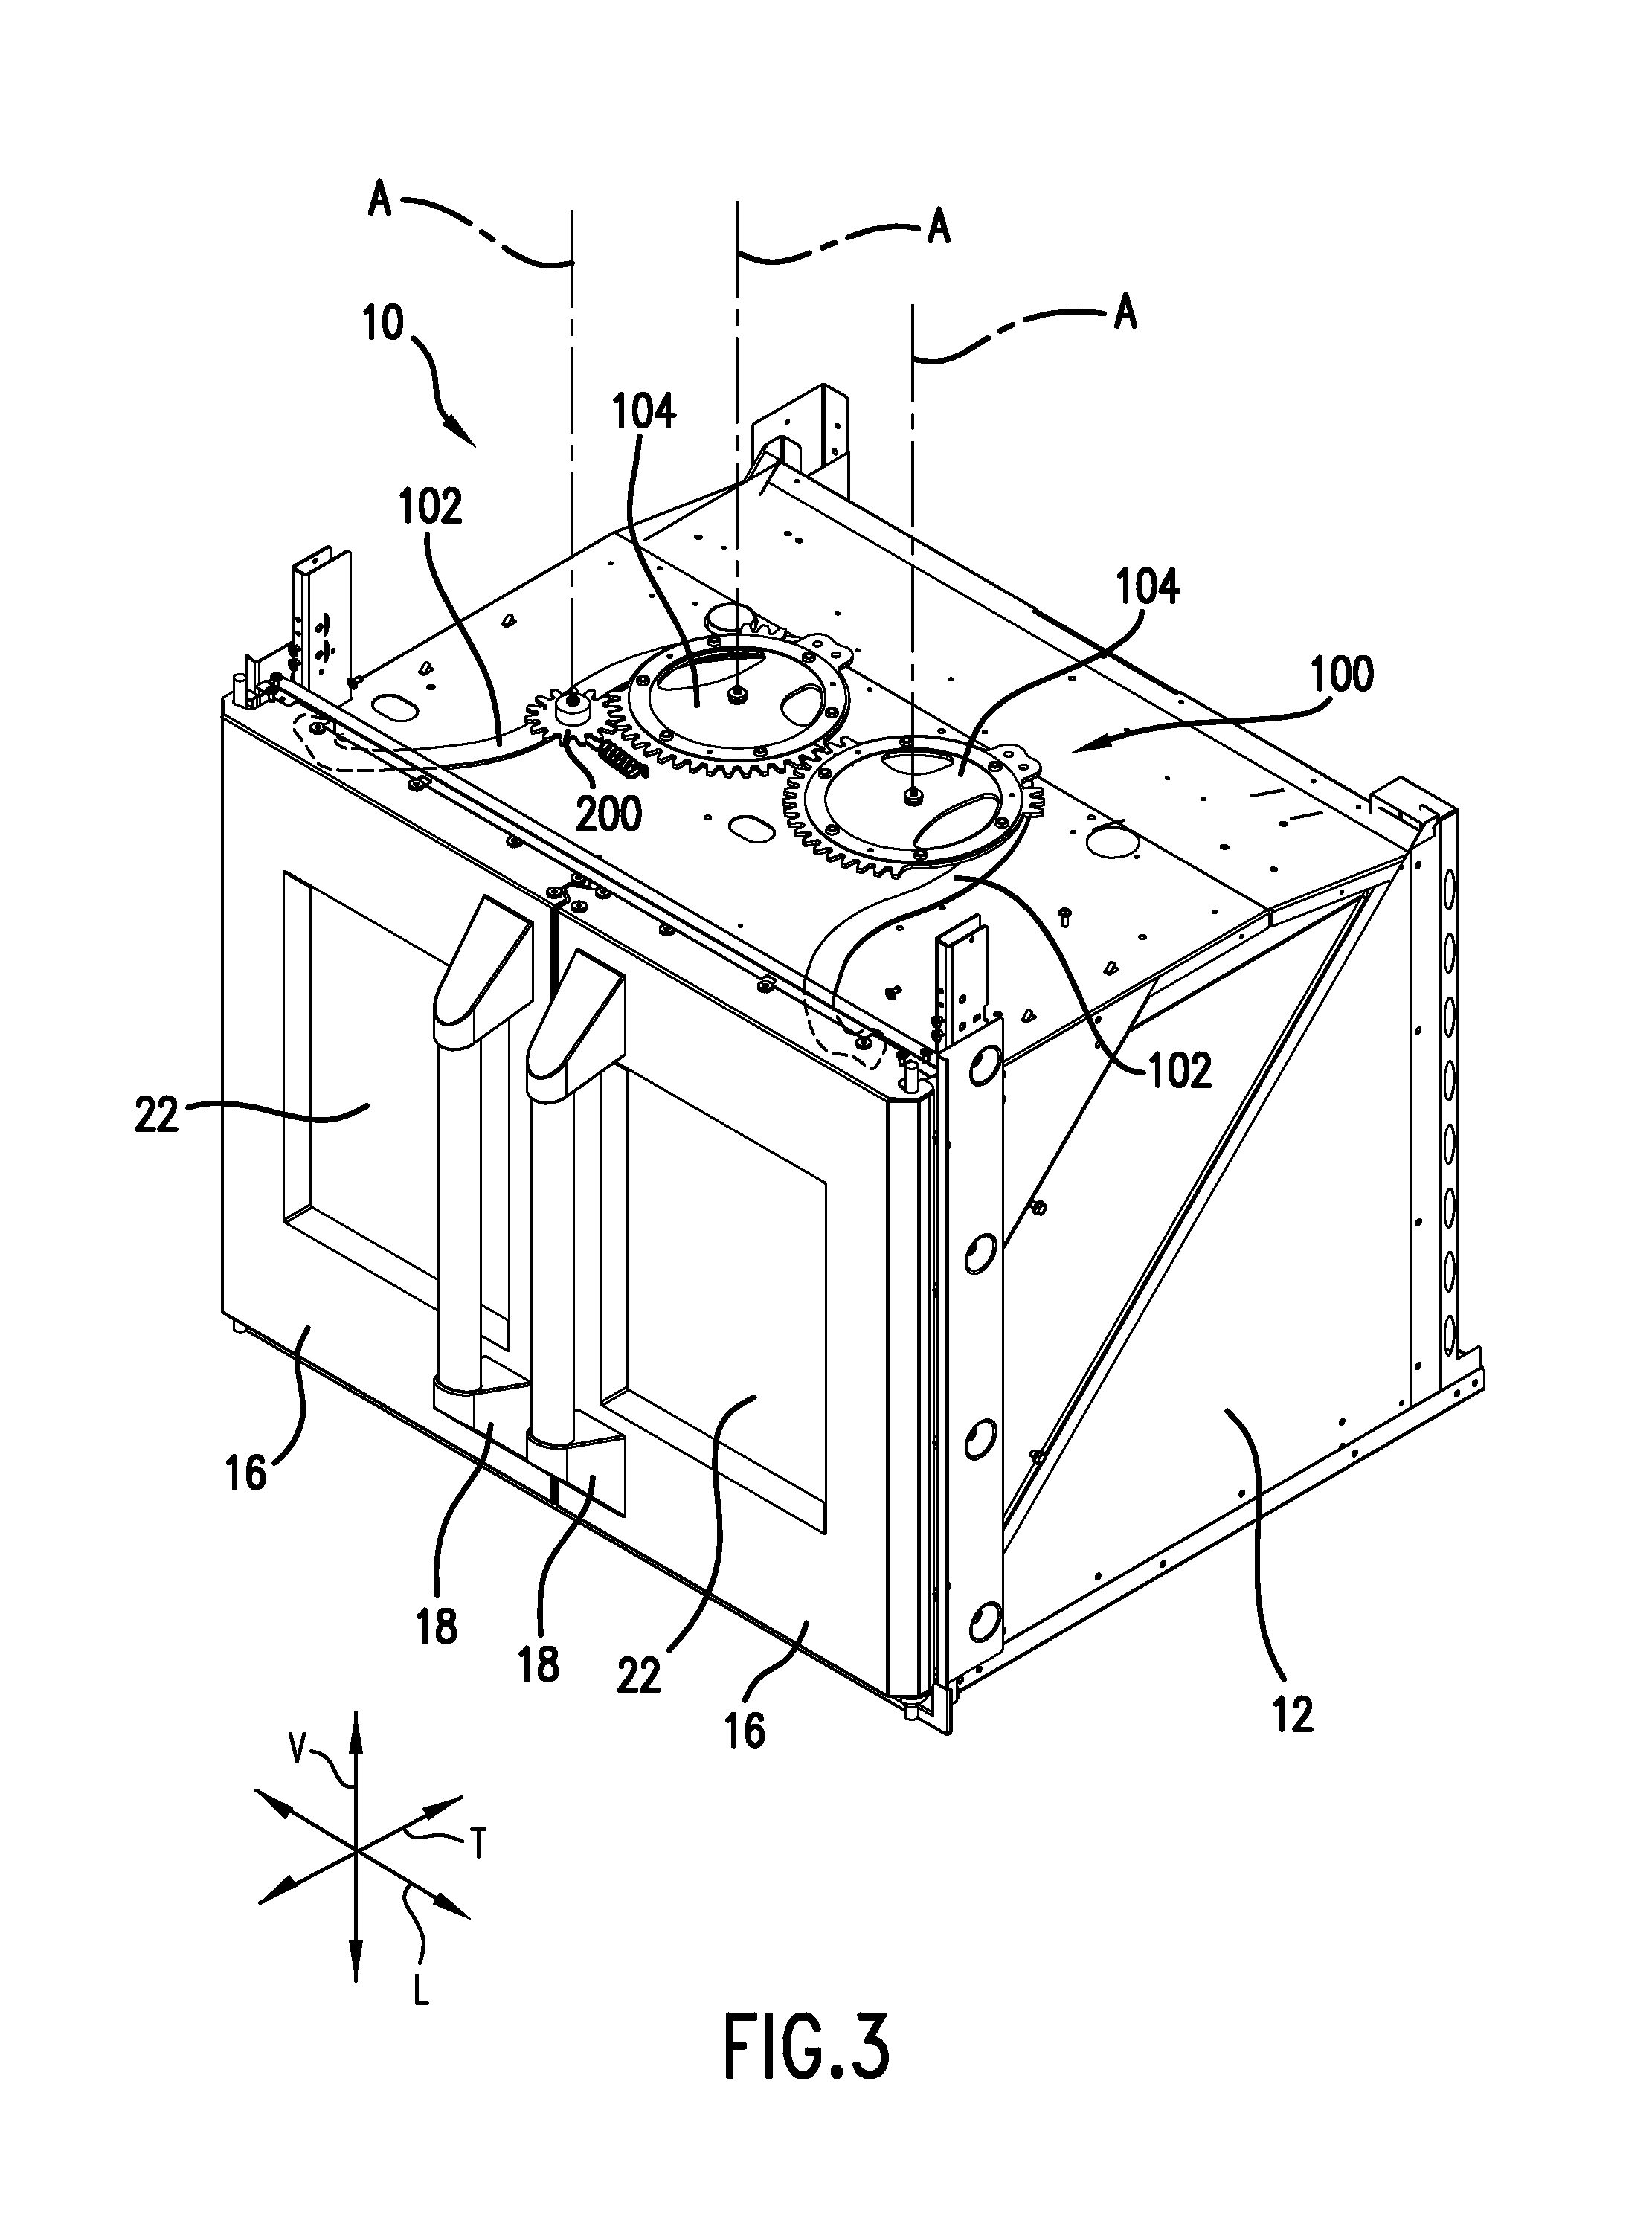 Oven appliance with dual opening and closing doors